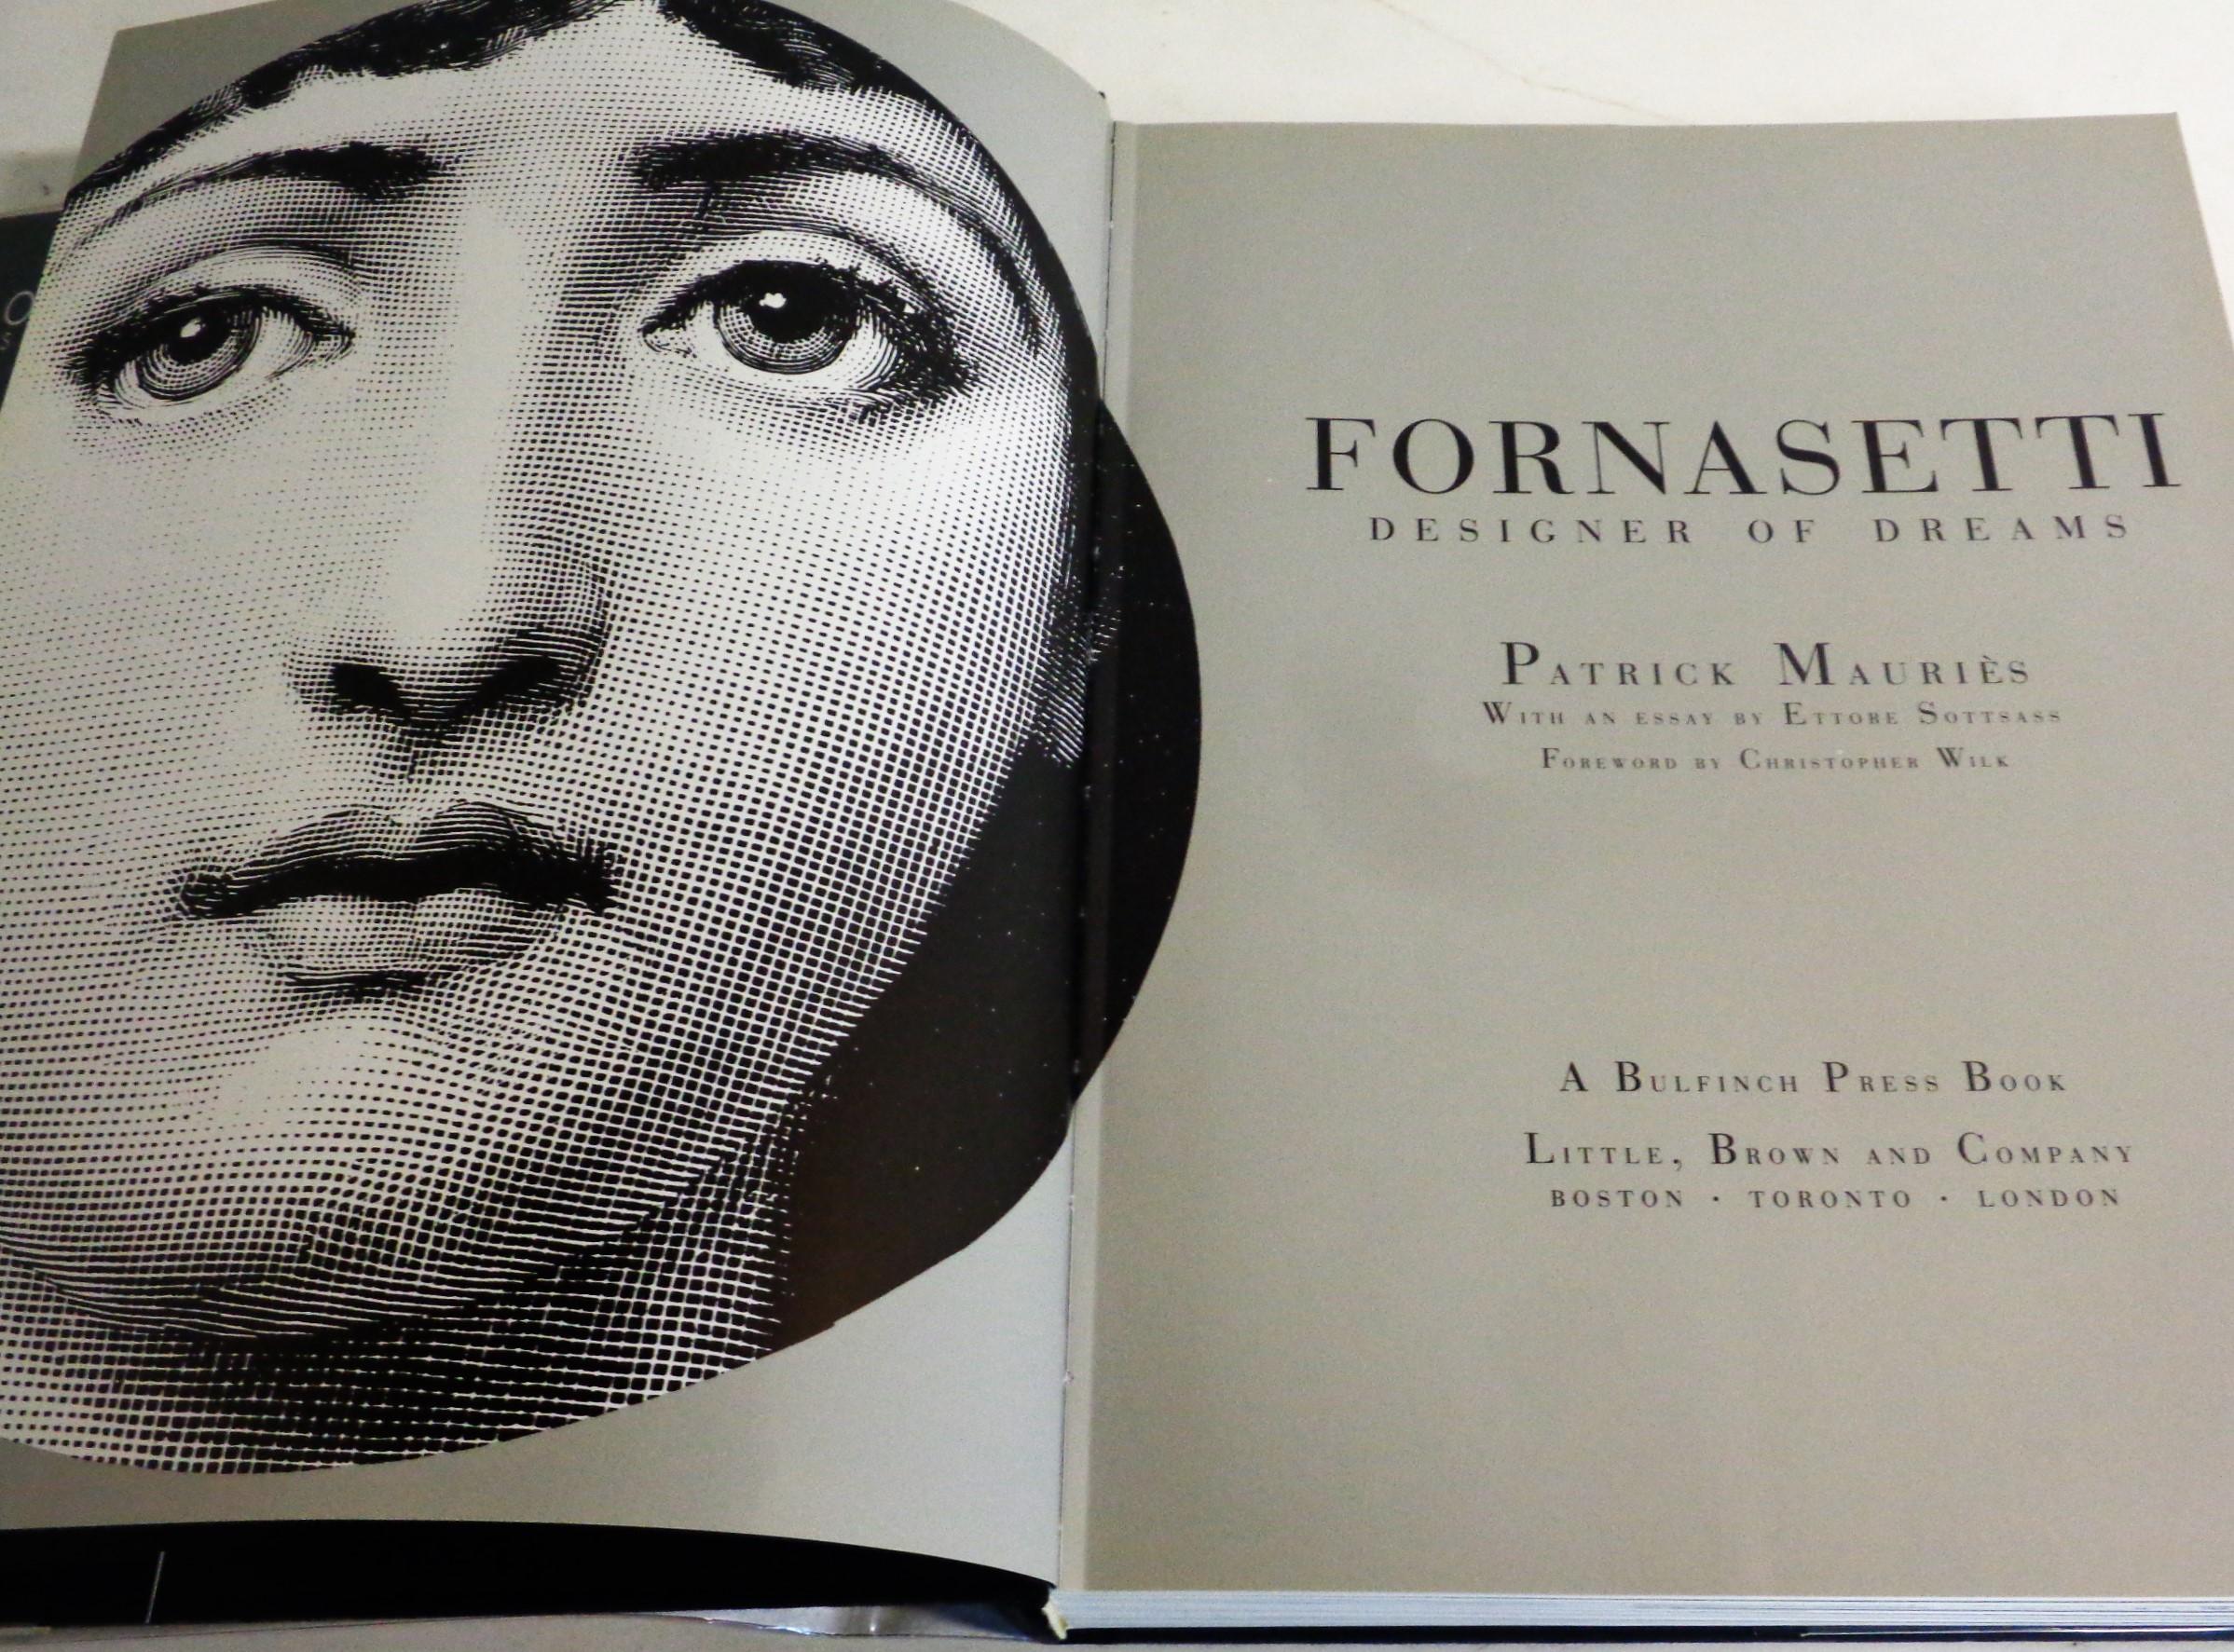 Paper Fornasetti: Designer of Dreams - Mauries, 1991 Bullfinch Press - 1st Edition For Sale